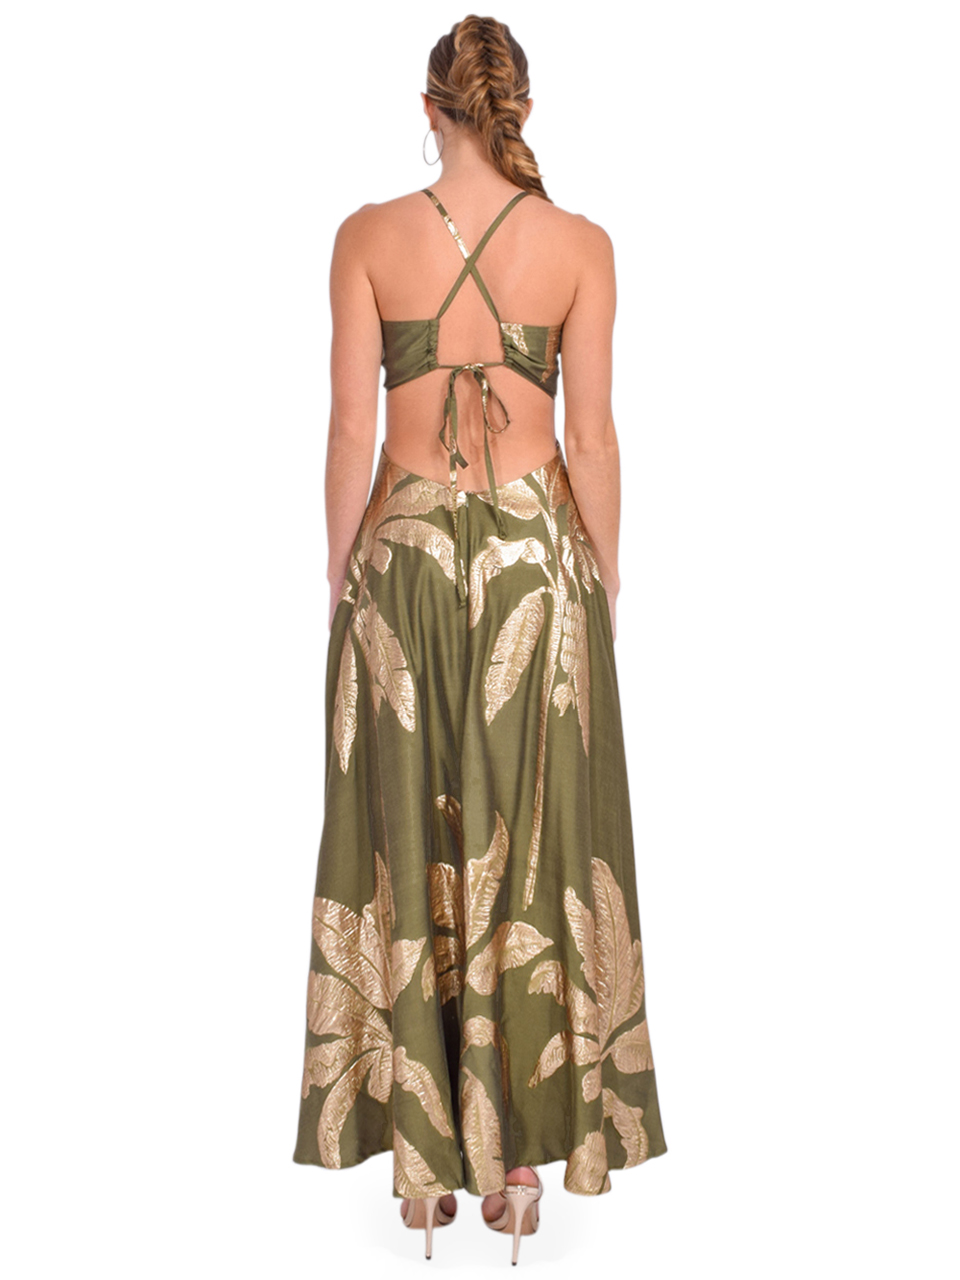 LACE Maxi Dress in Pesto Green Back View 